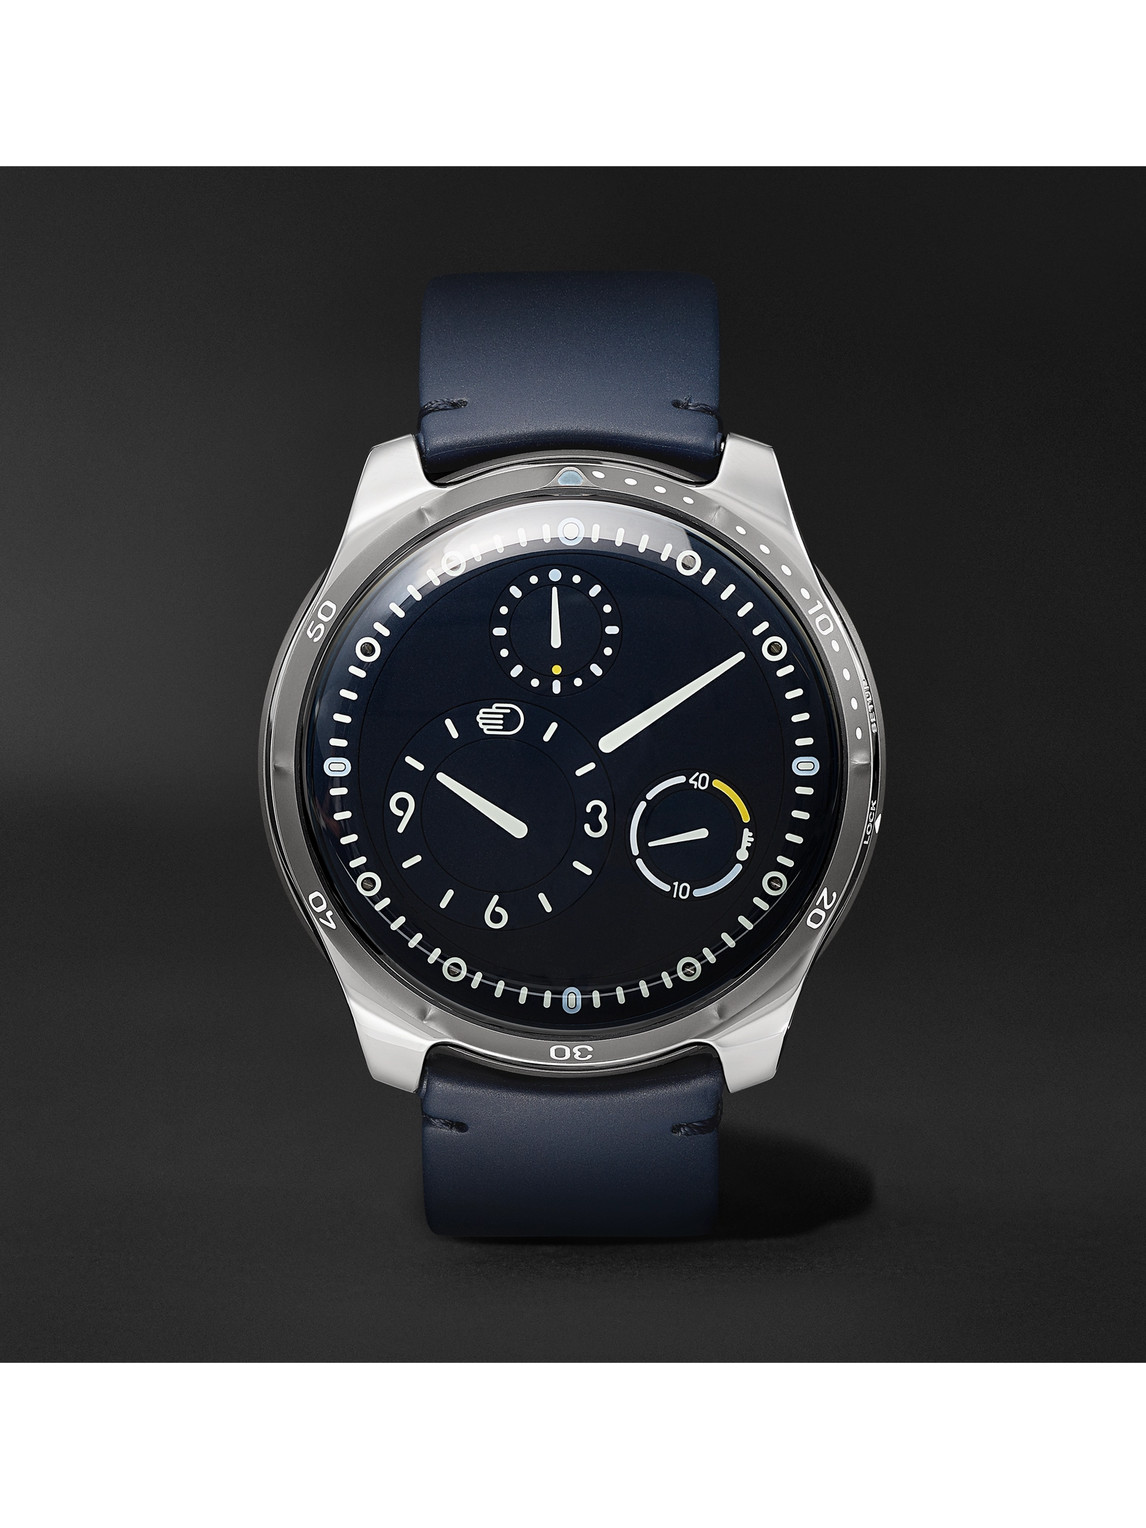 Ressence Exclusive Type 5 46mm Titanium And Leather Mechanical Watch, Ref. No. Type 5n In Black